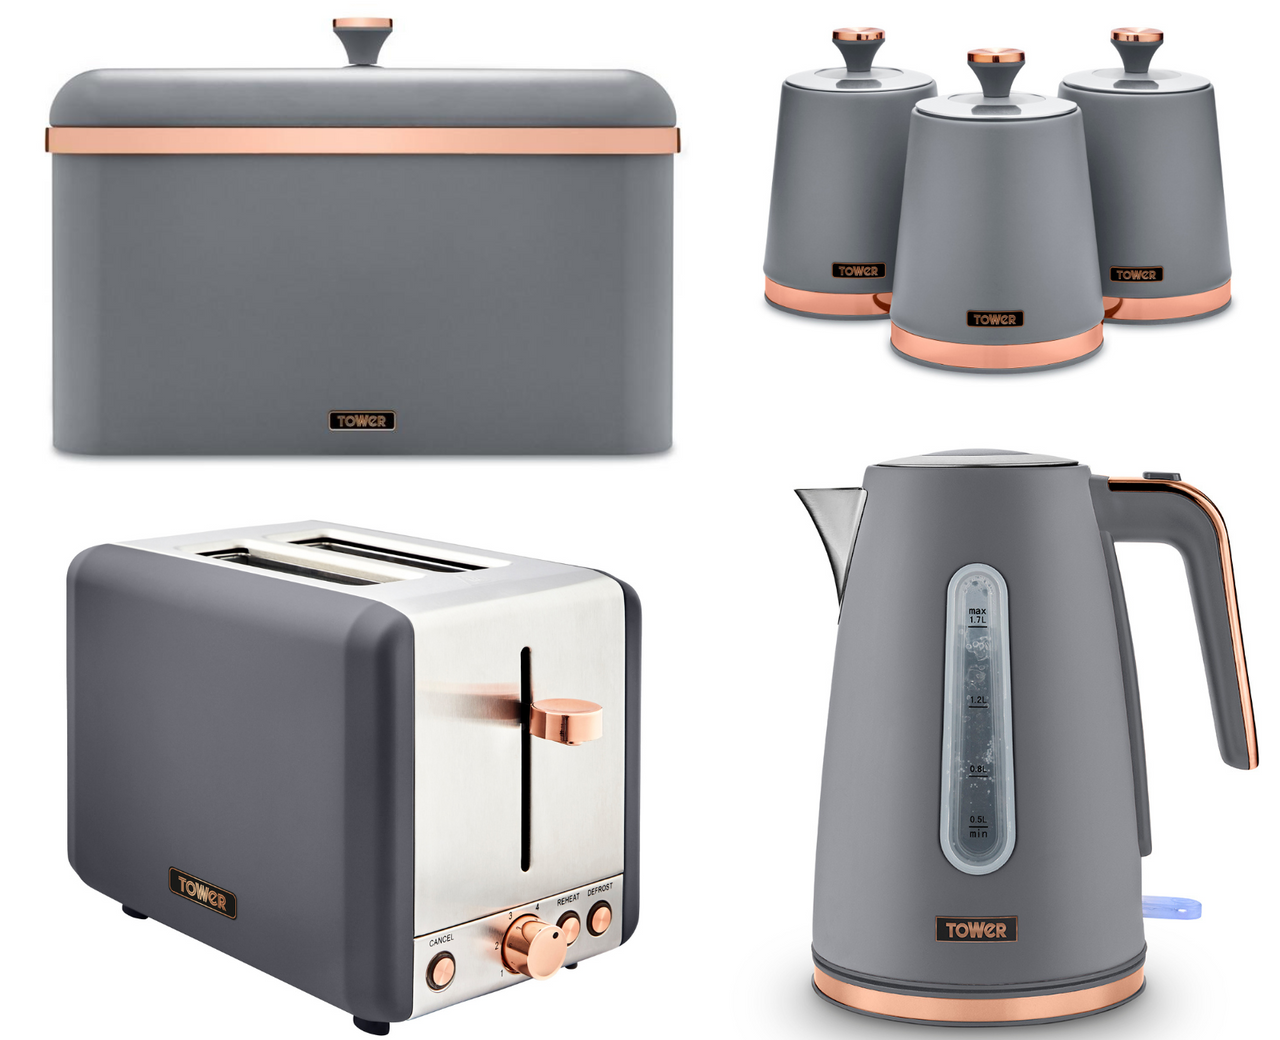 Tower Cavaletto Jug Kettle 2 Slice Toaster Bread Bin Canisters Grey & Rose Gold